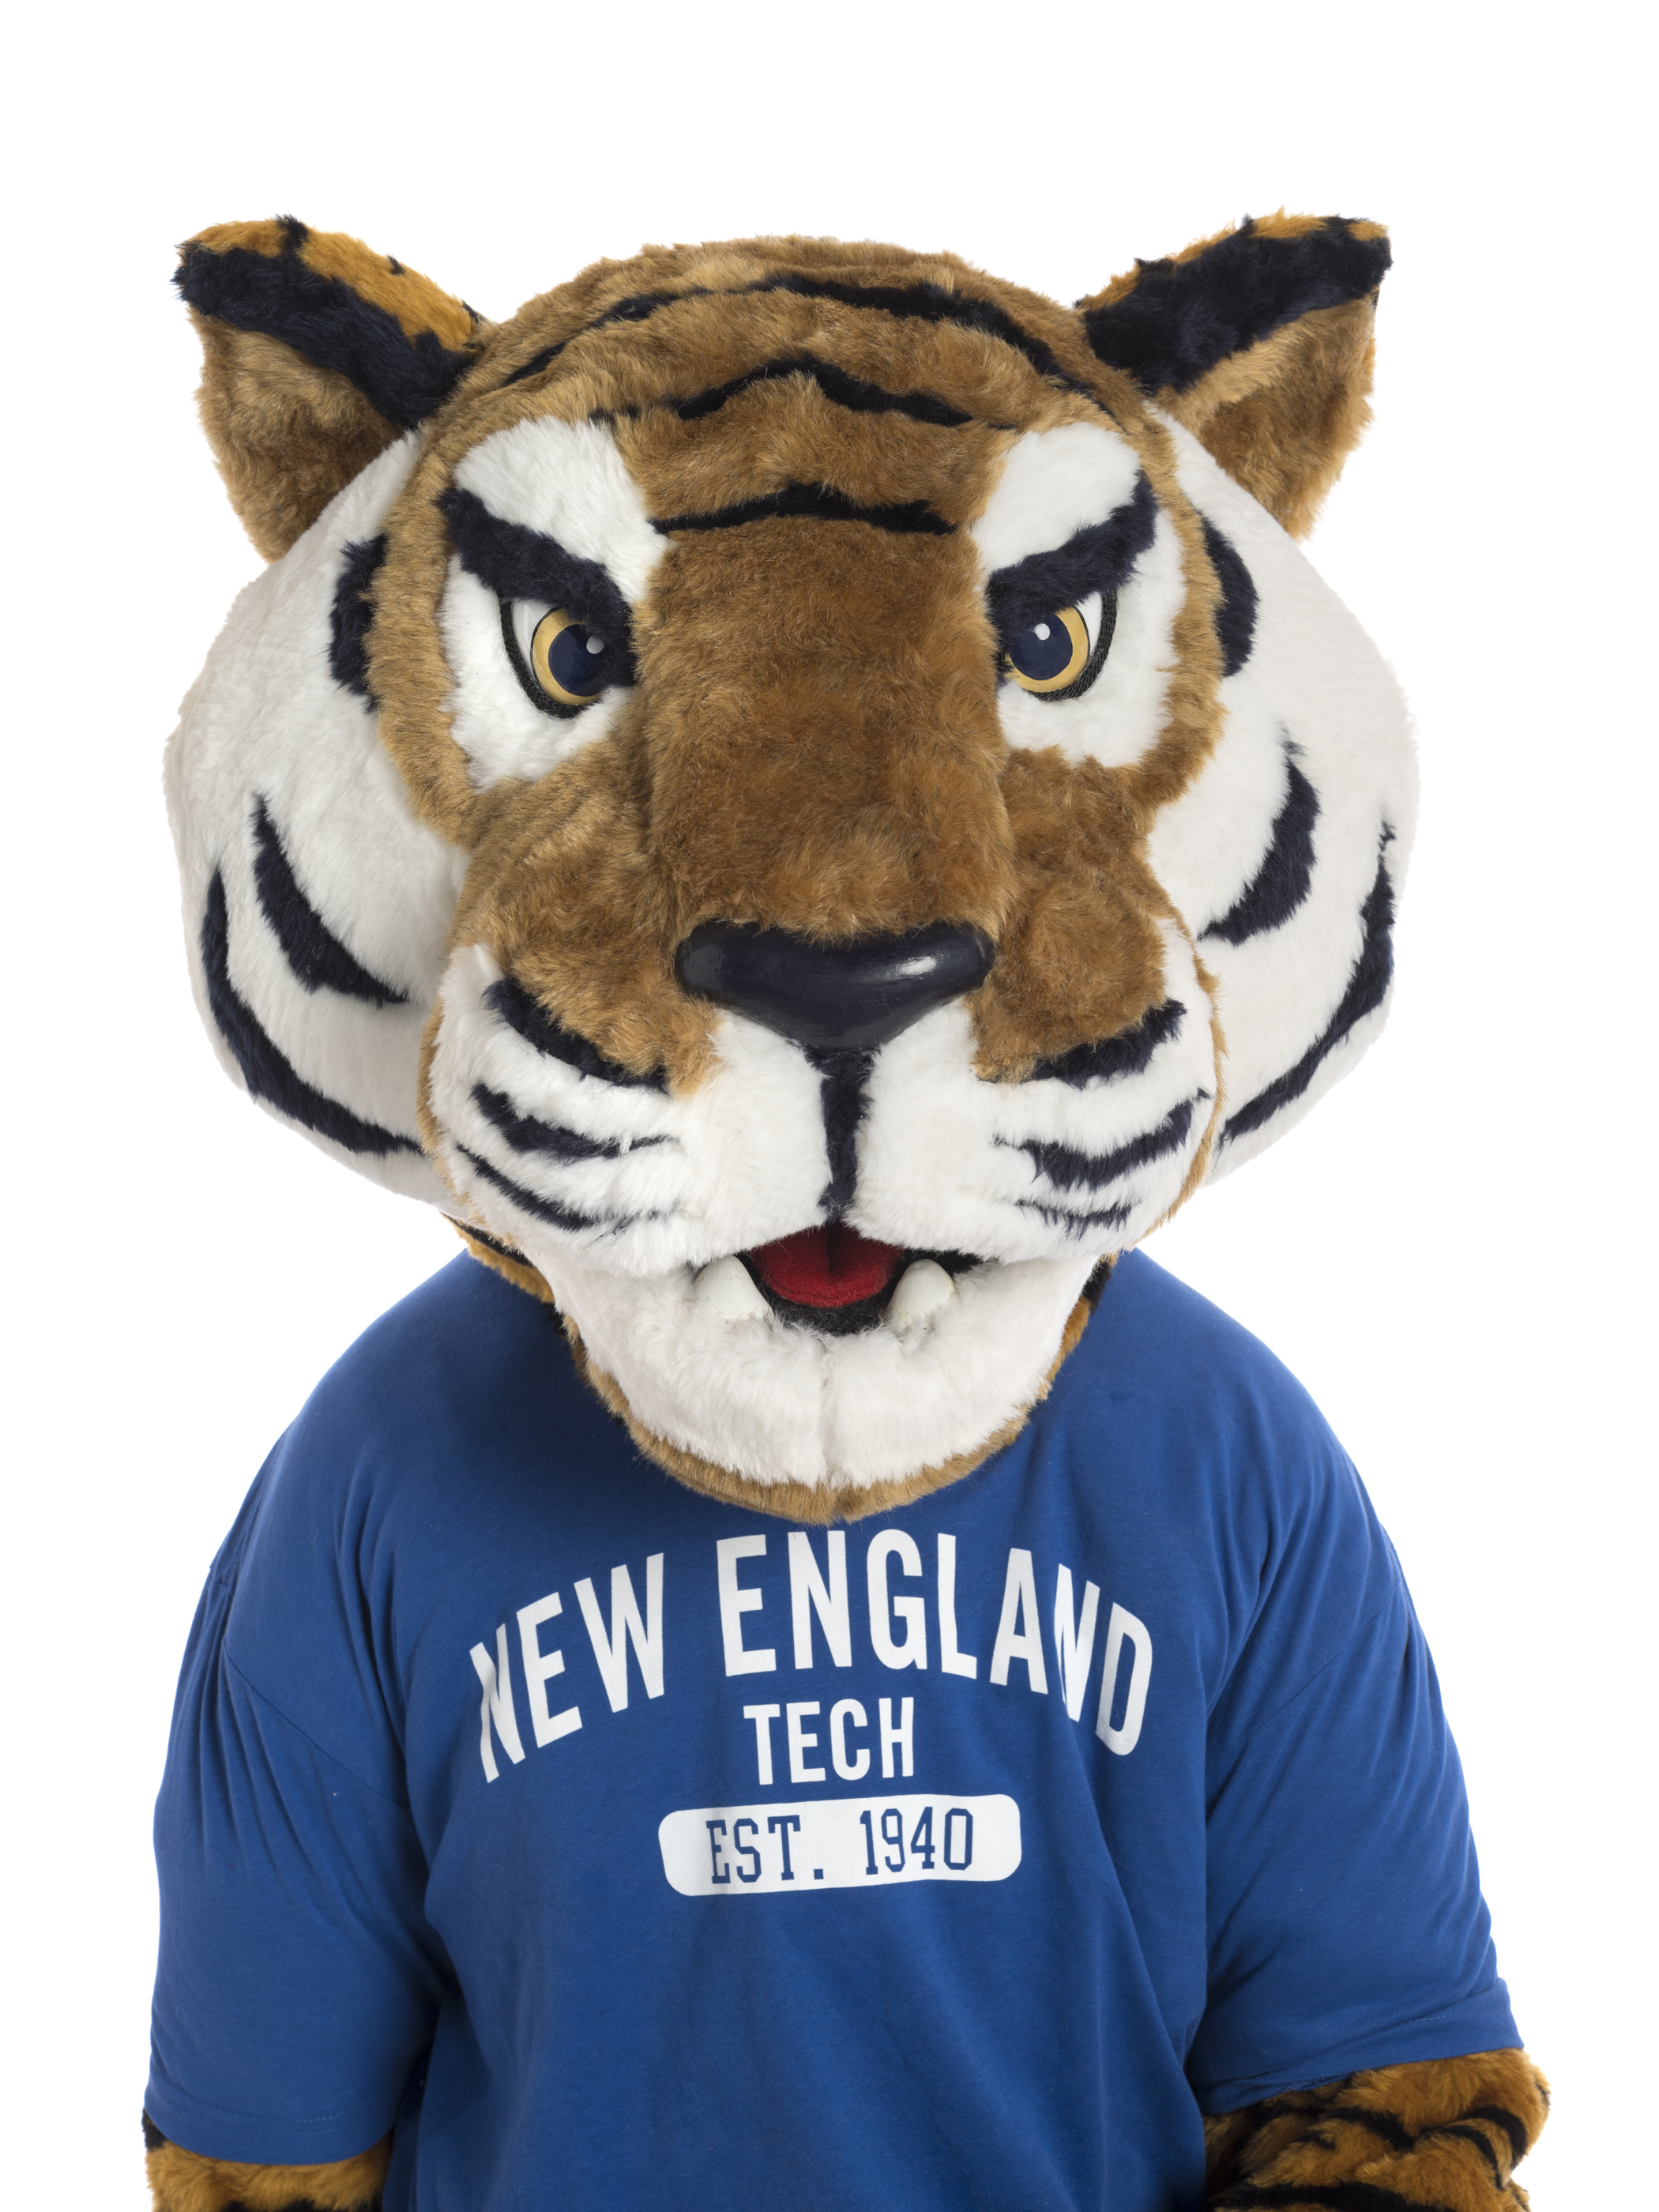 New England Institute of Tech